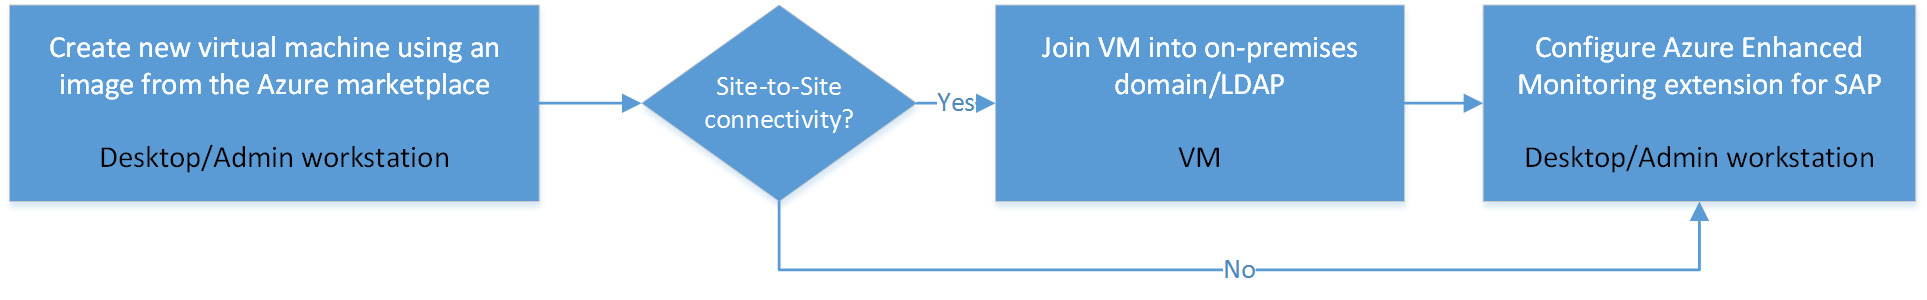 Flowchart of VM deployment for SAP systems by using a VM image from the Azure Marketplace